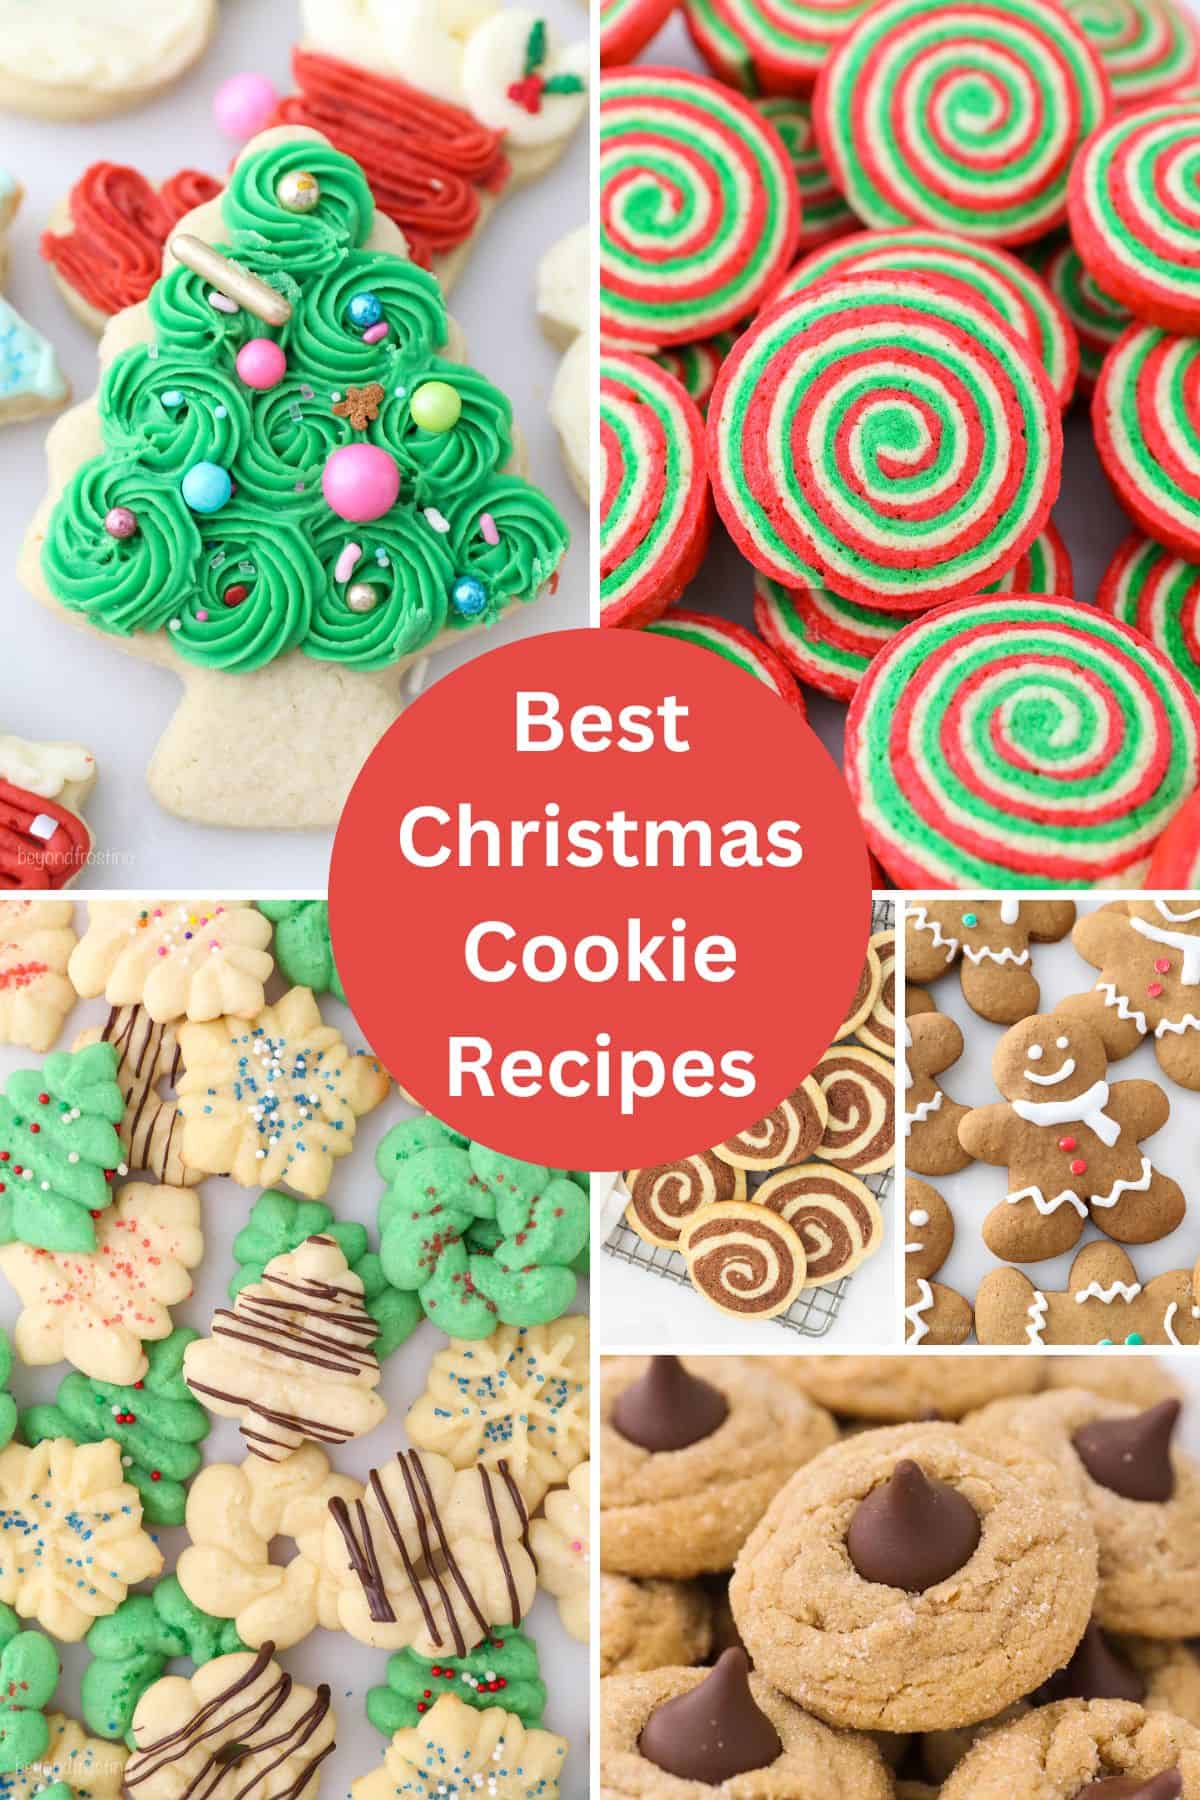 A collage image different Christmas cookie recipes